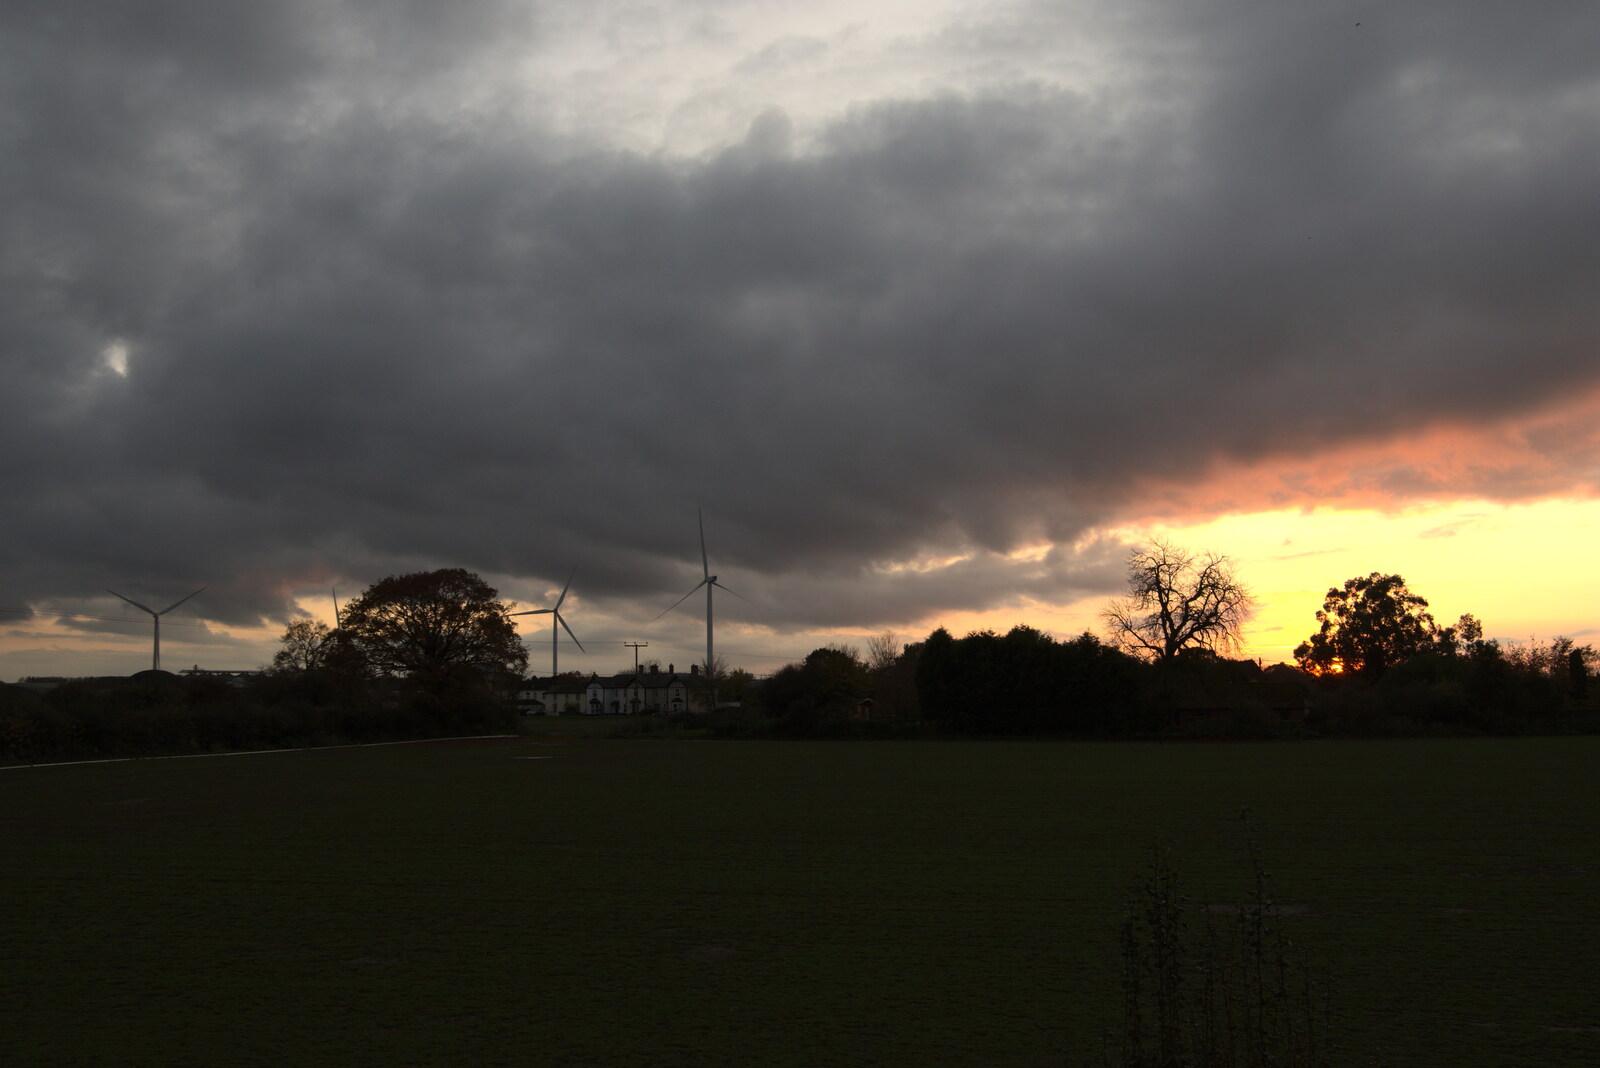 Dark clouds over the airfield turbines from Pre-Lockdown in Station 119, Eye, Suffolk - 4th November 2020